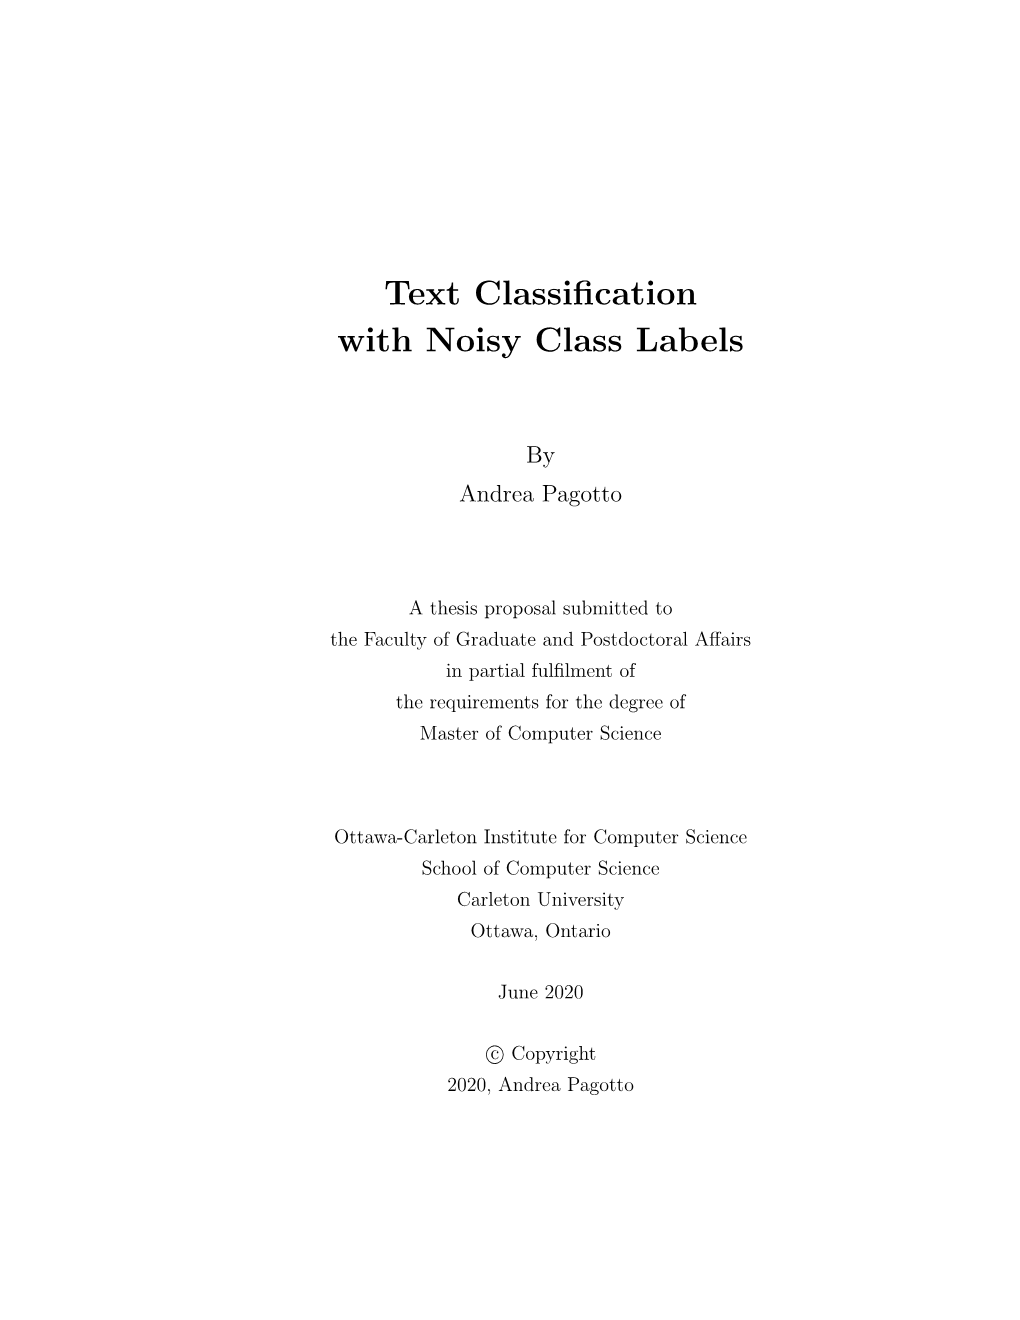 Text Classification with Noisy Class Labels